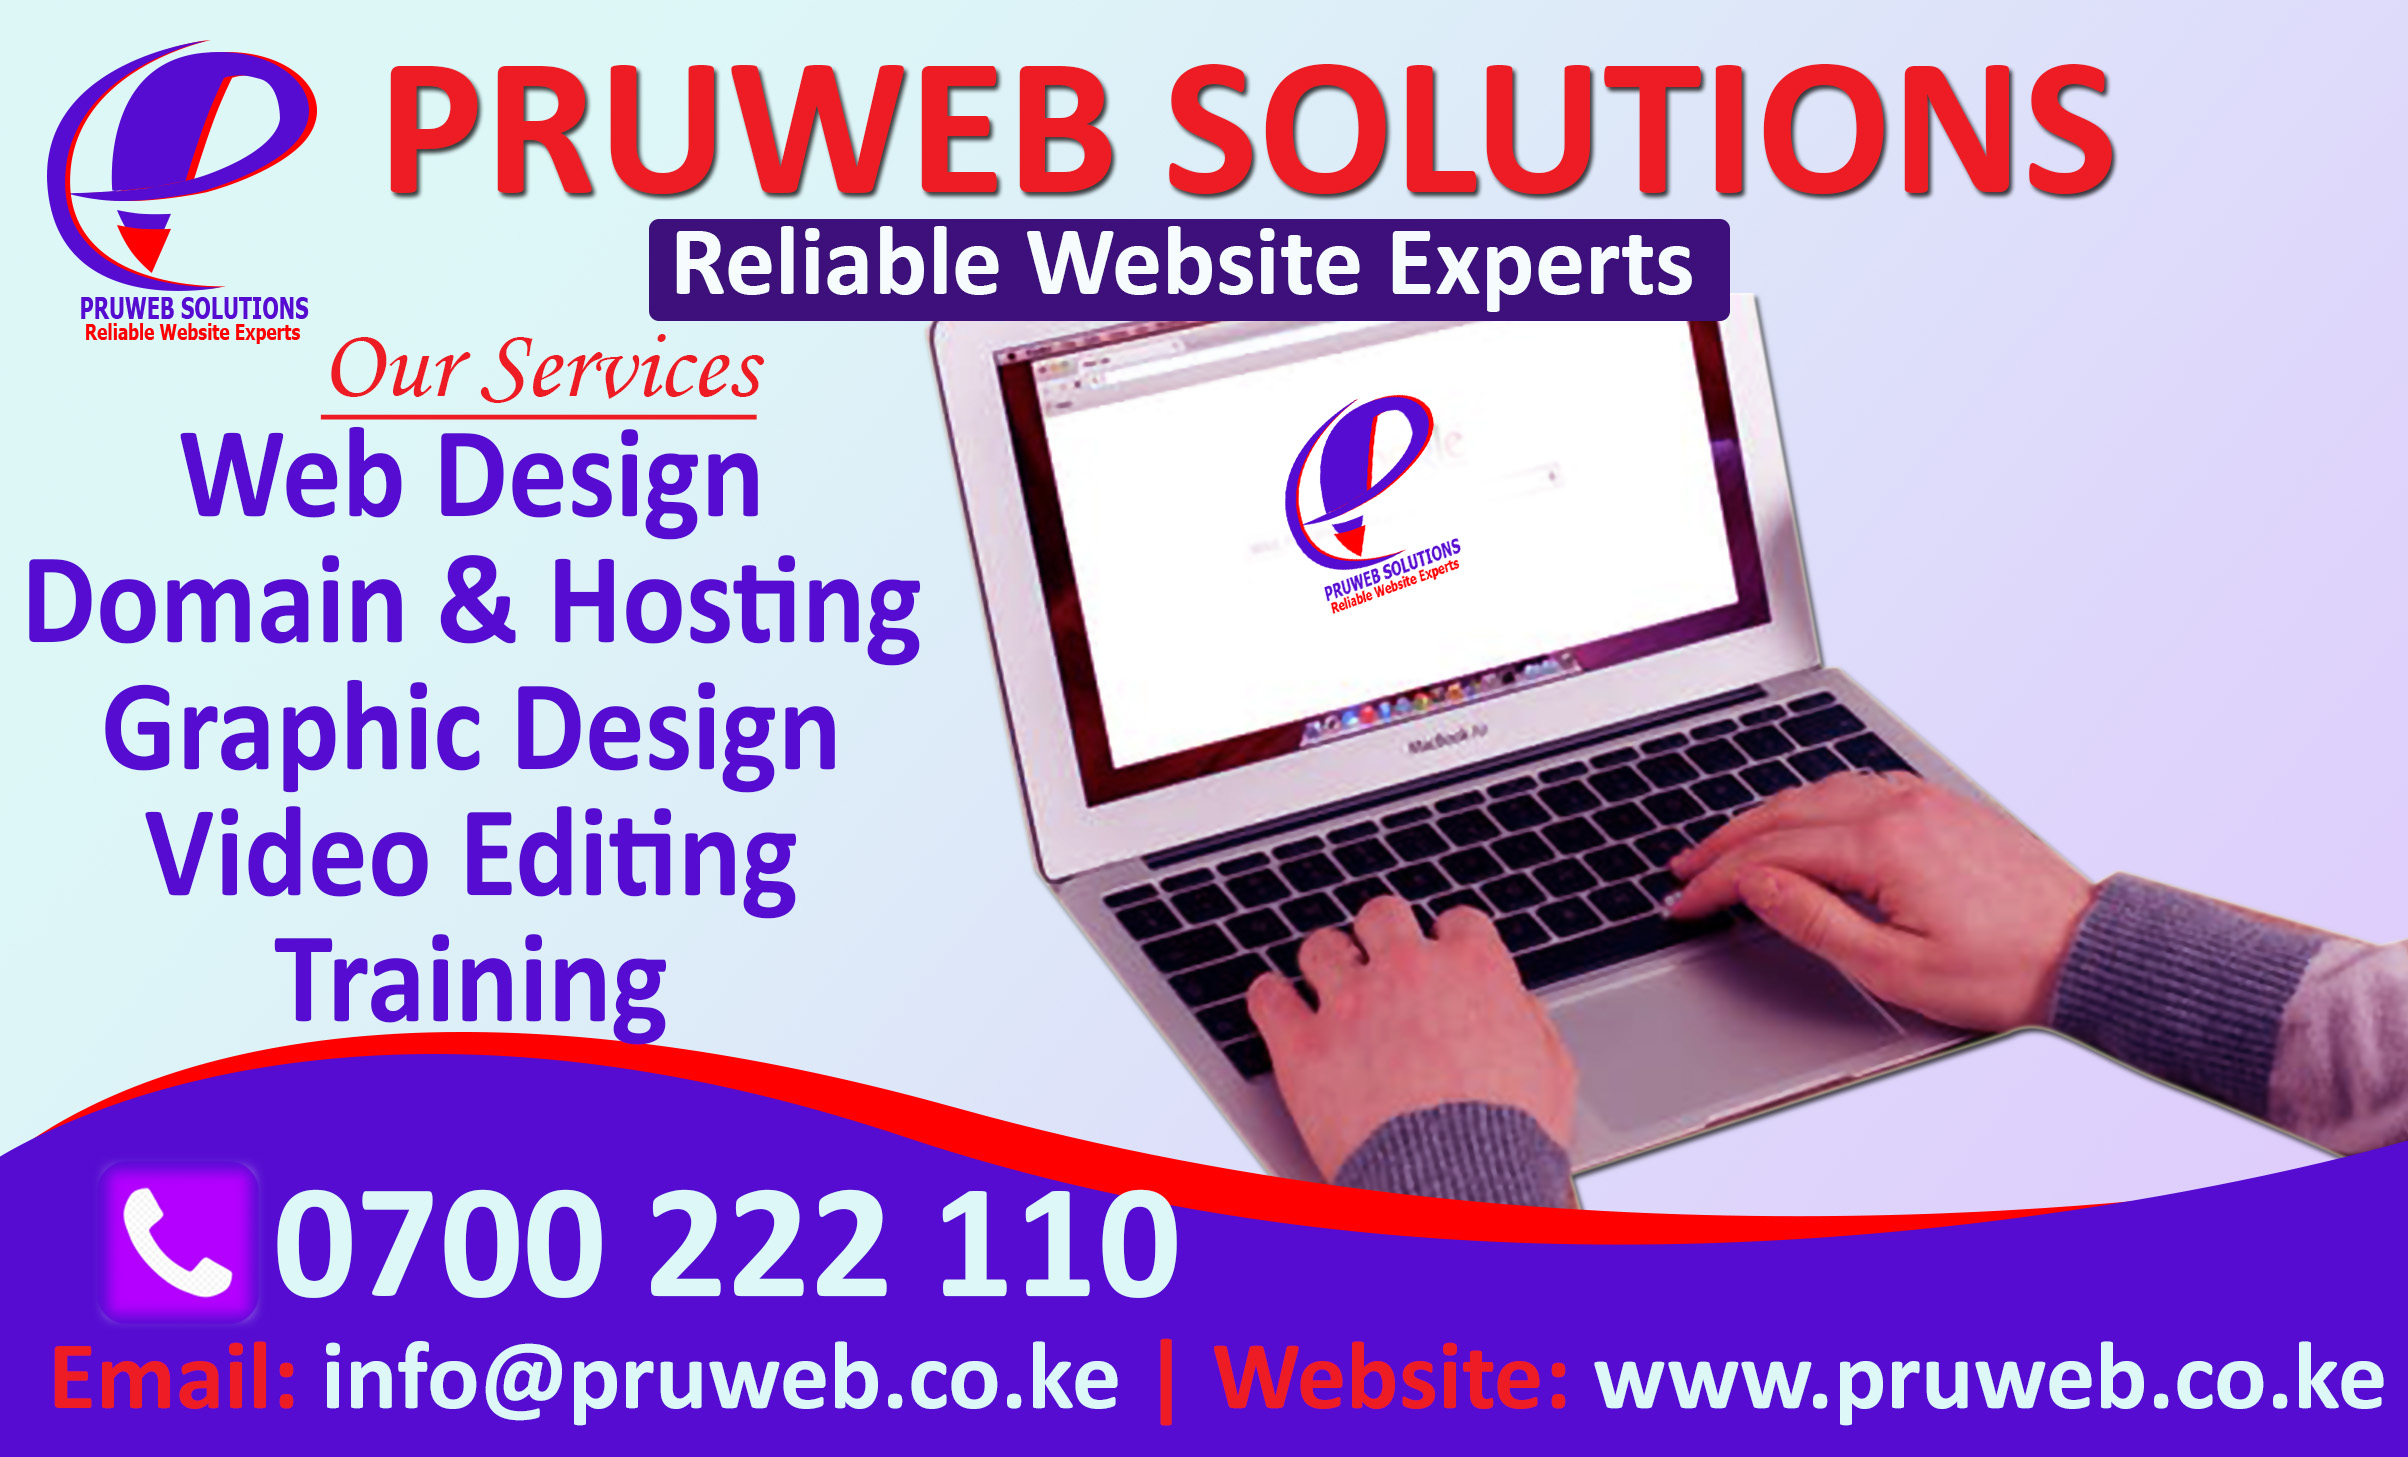 PruwebSolutions Poster 3